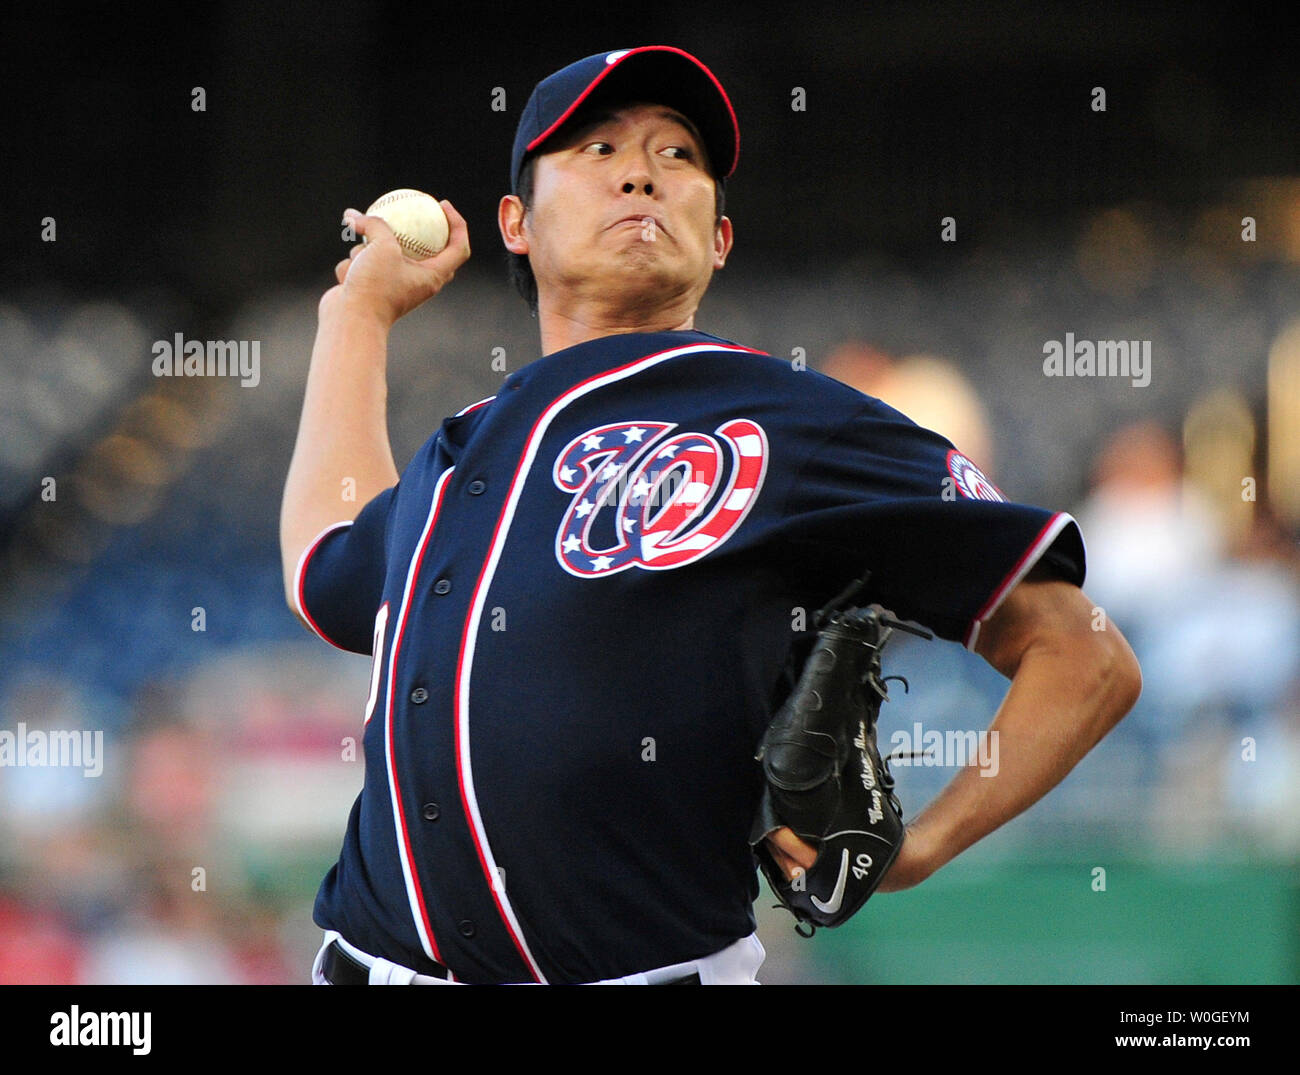 Former Nats Pitcher Chien-Ming Wang Reflects on Journey Back to